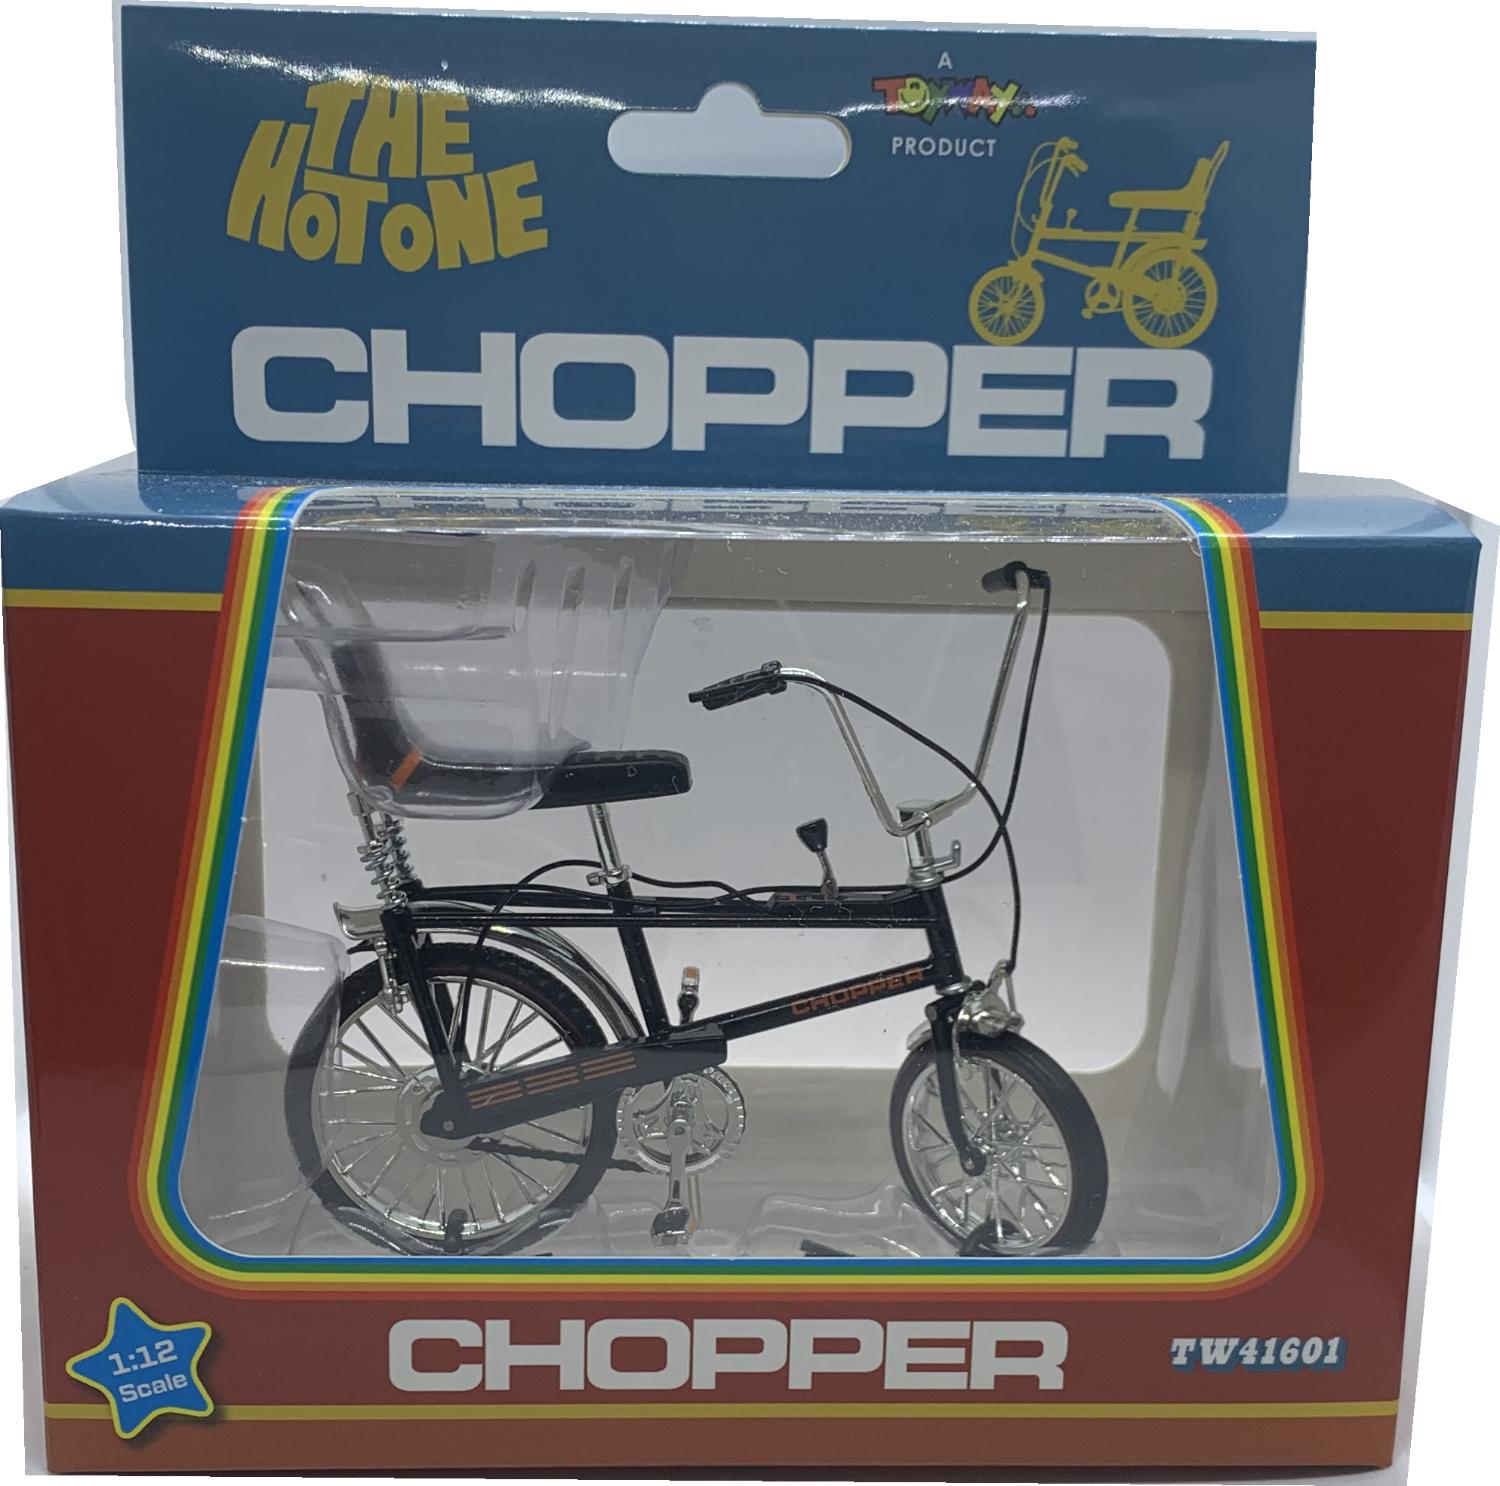 Chopper mk1 Classic 1970’s Bicycle in black 1:12 scale model from Toyway